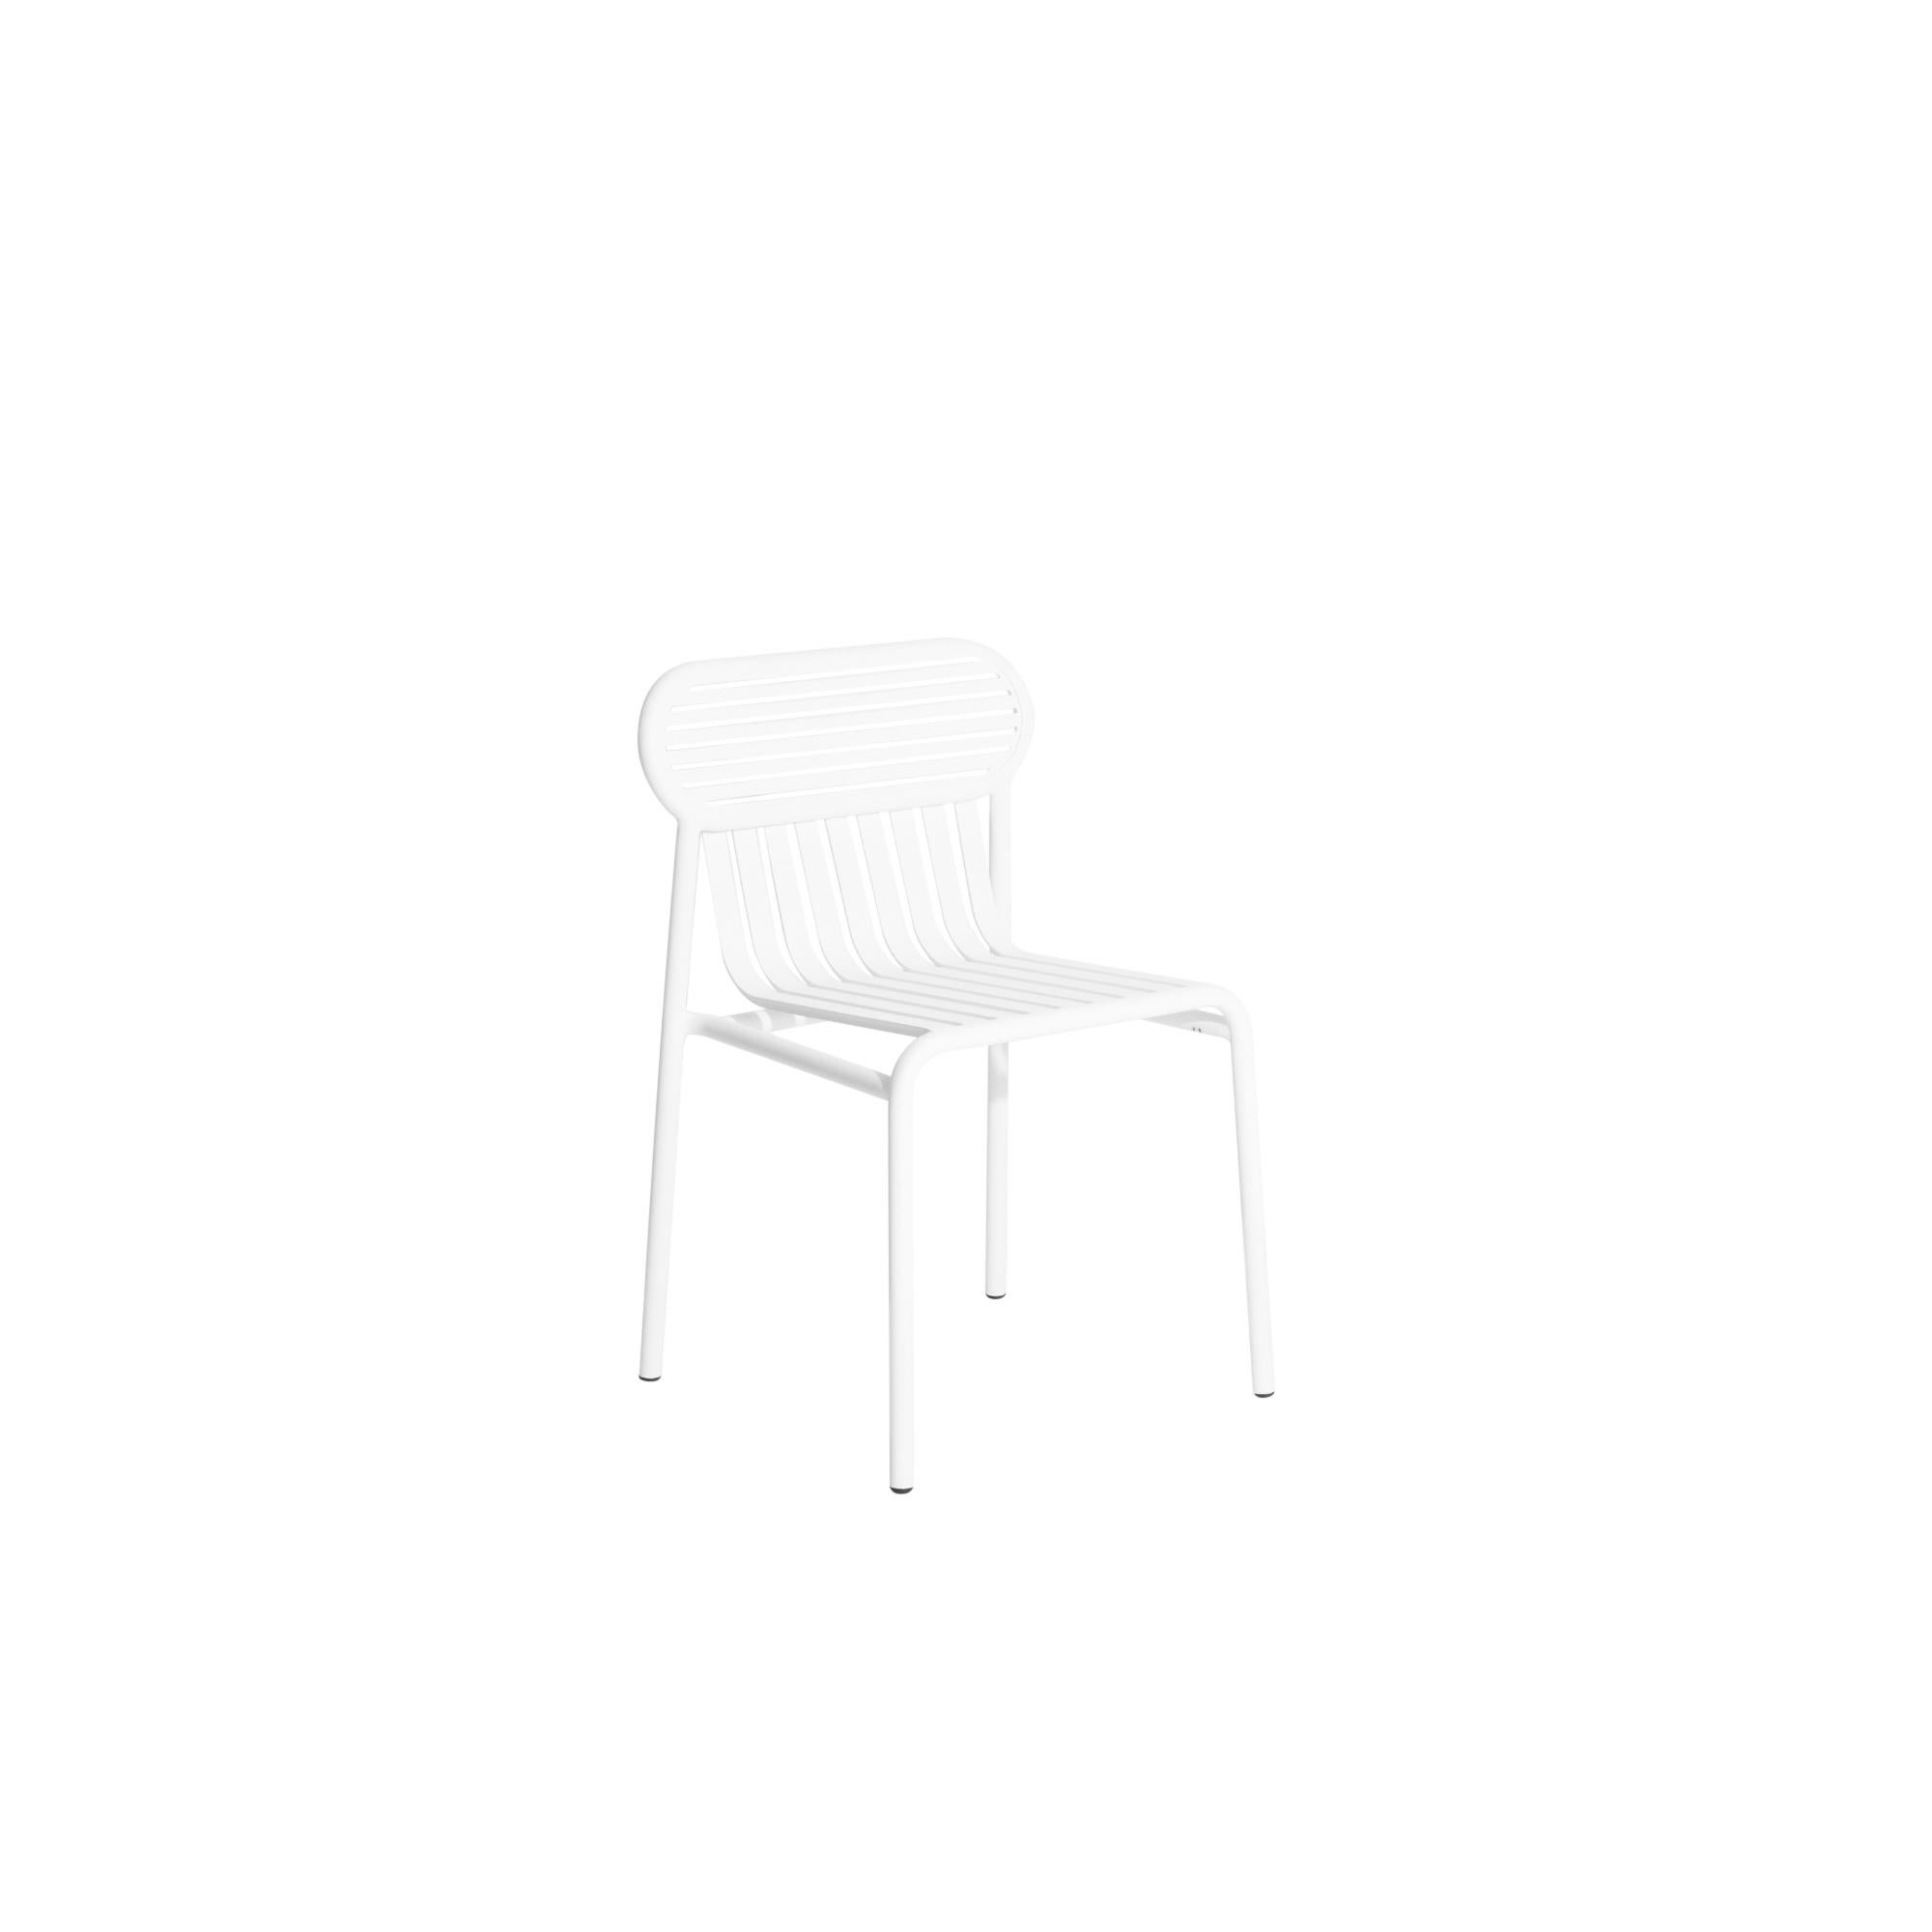 Petite Friture Week-End Chair in White Aluminium by Studio BrichetZiegler, 2017

The week-end collection is a full range of outdoor furniture, in aluminium grained epoxy paint, matt finish, that includes 18 functions and 8 colours for the retail